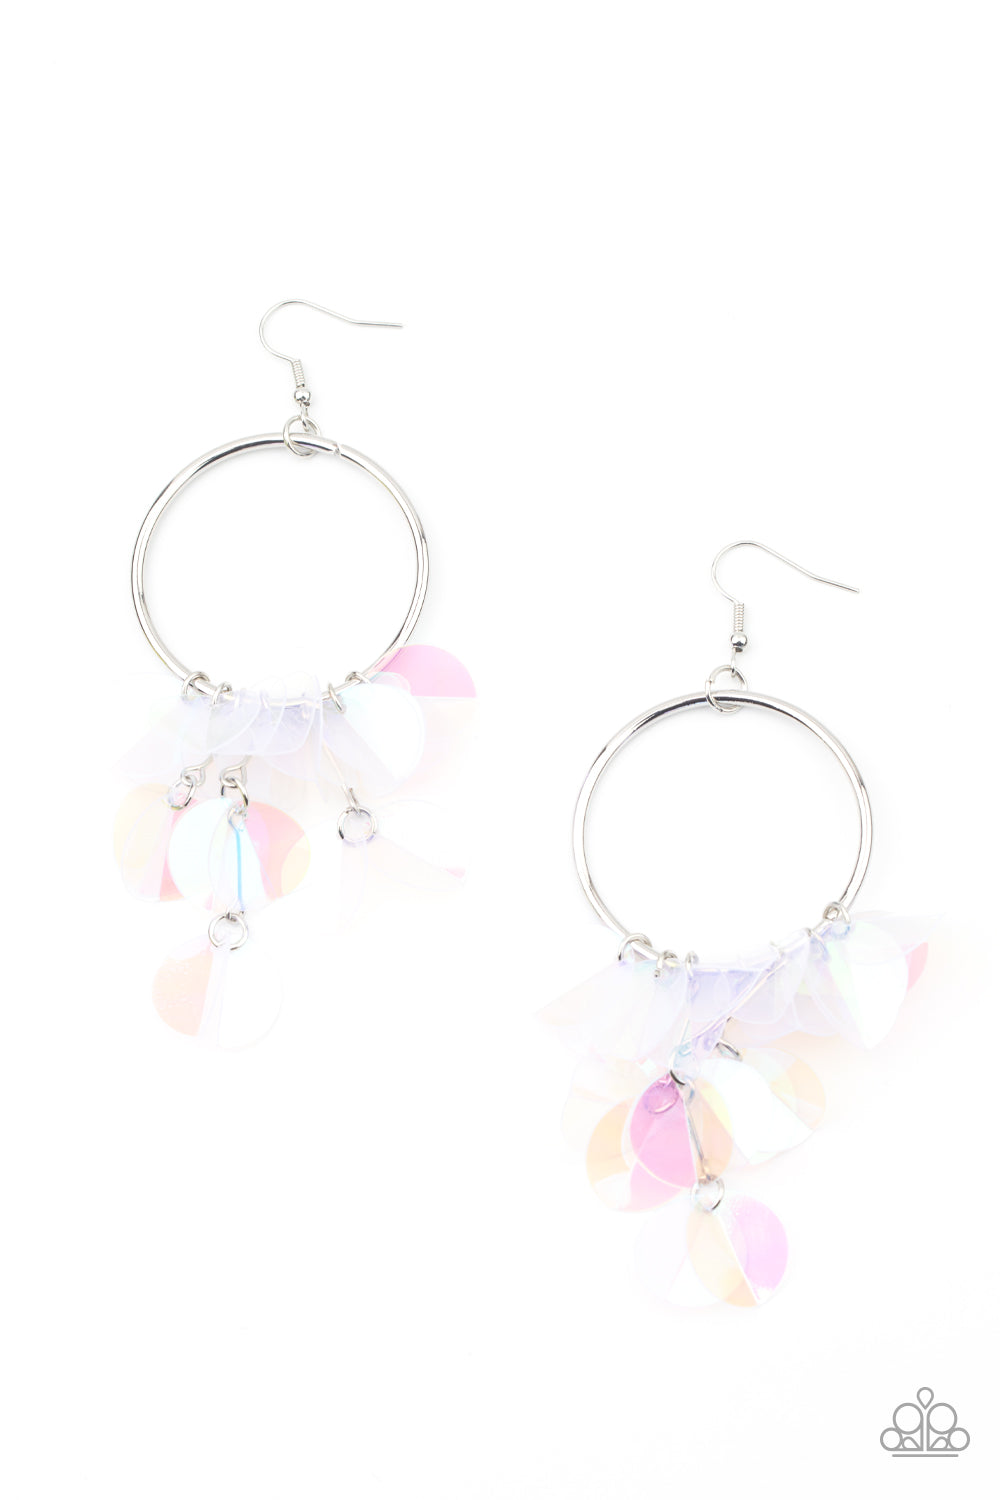 Paparazzi Holographic Hype - Multi Earrings -May 2021 Life Of The Party Exclusive - A Finishing Touch Jewelry